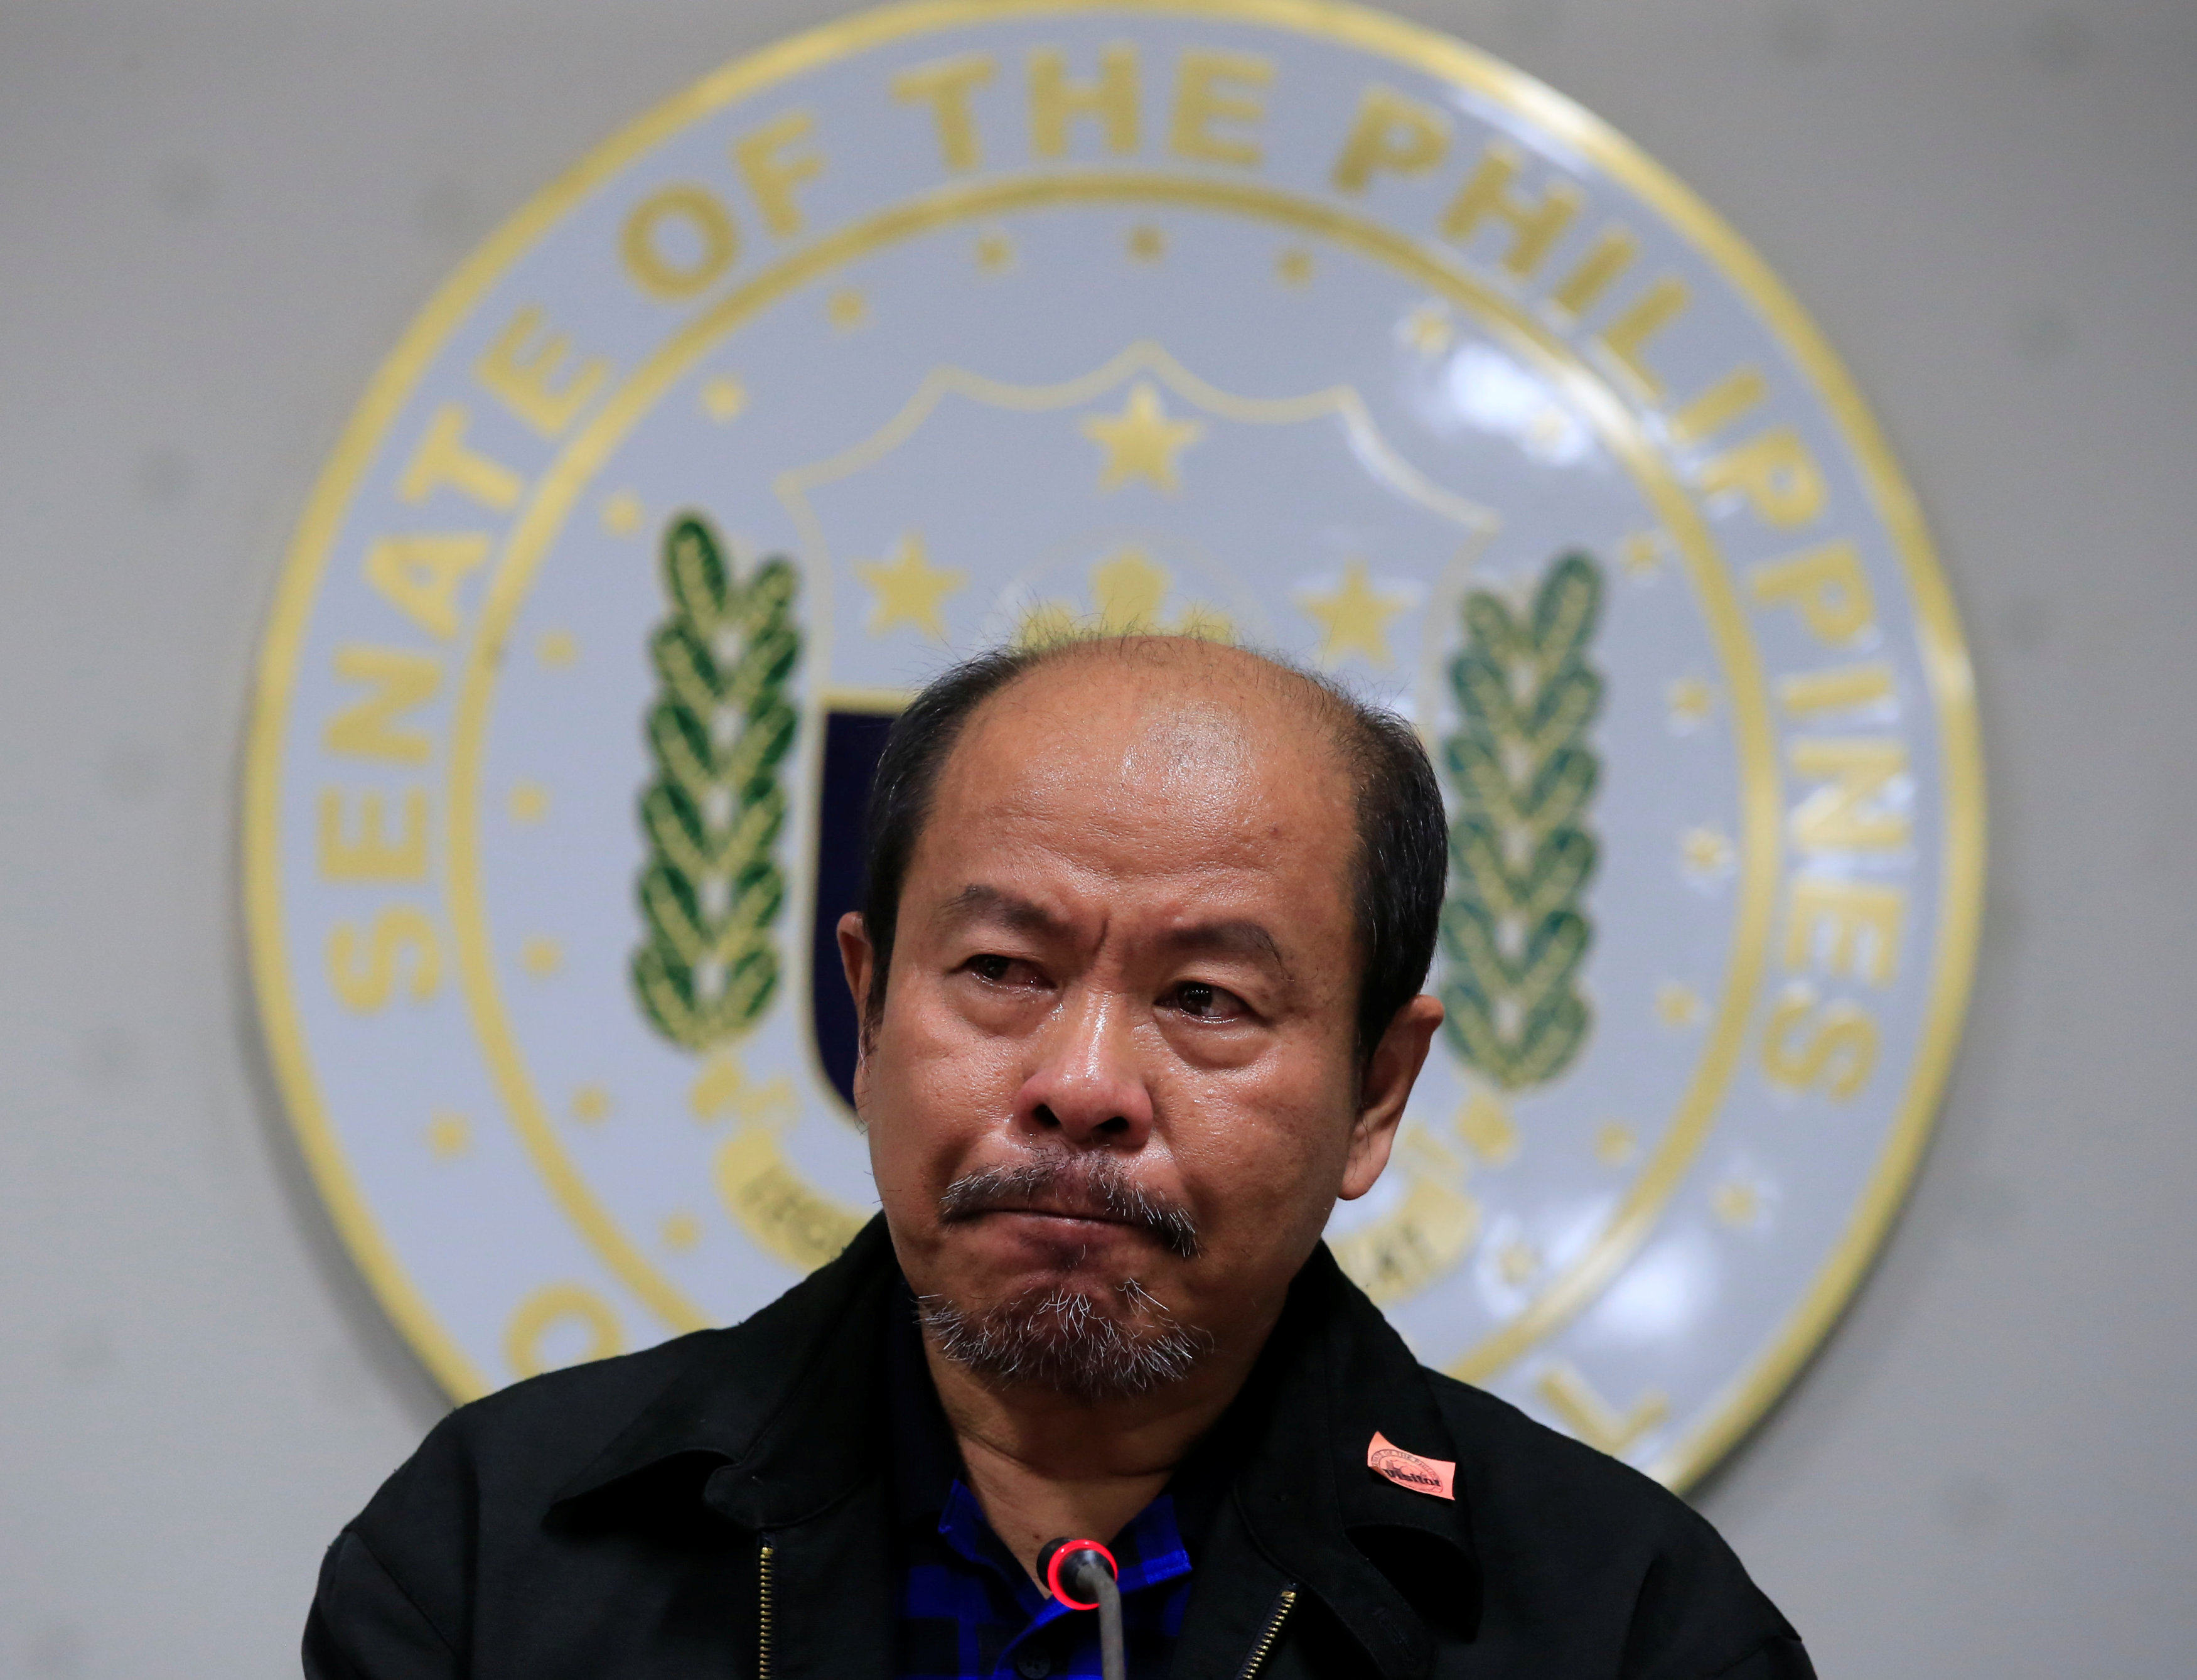 Retired Davao policeman Arturo Lascanas speaks at a news conference at the Senate headquarters in Manila. He accuses Rodrigo Duterte’s daughter and son of masterminding a deadly campaign in their home city. Photo: Reuters